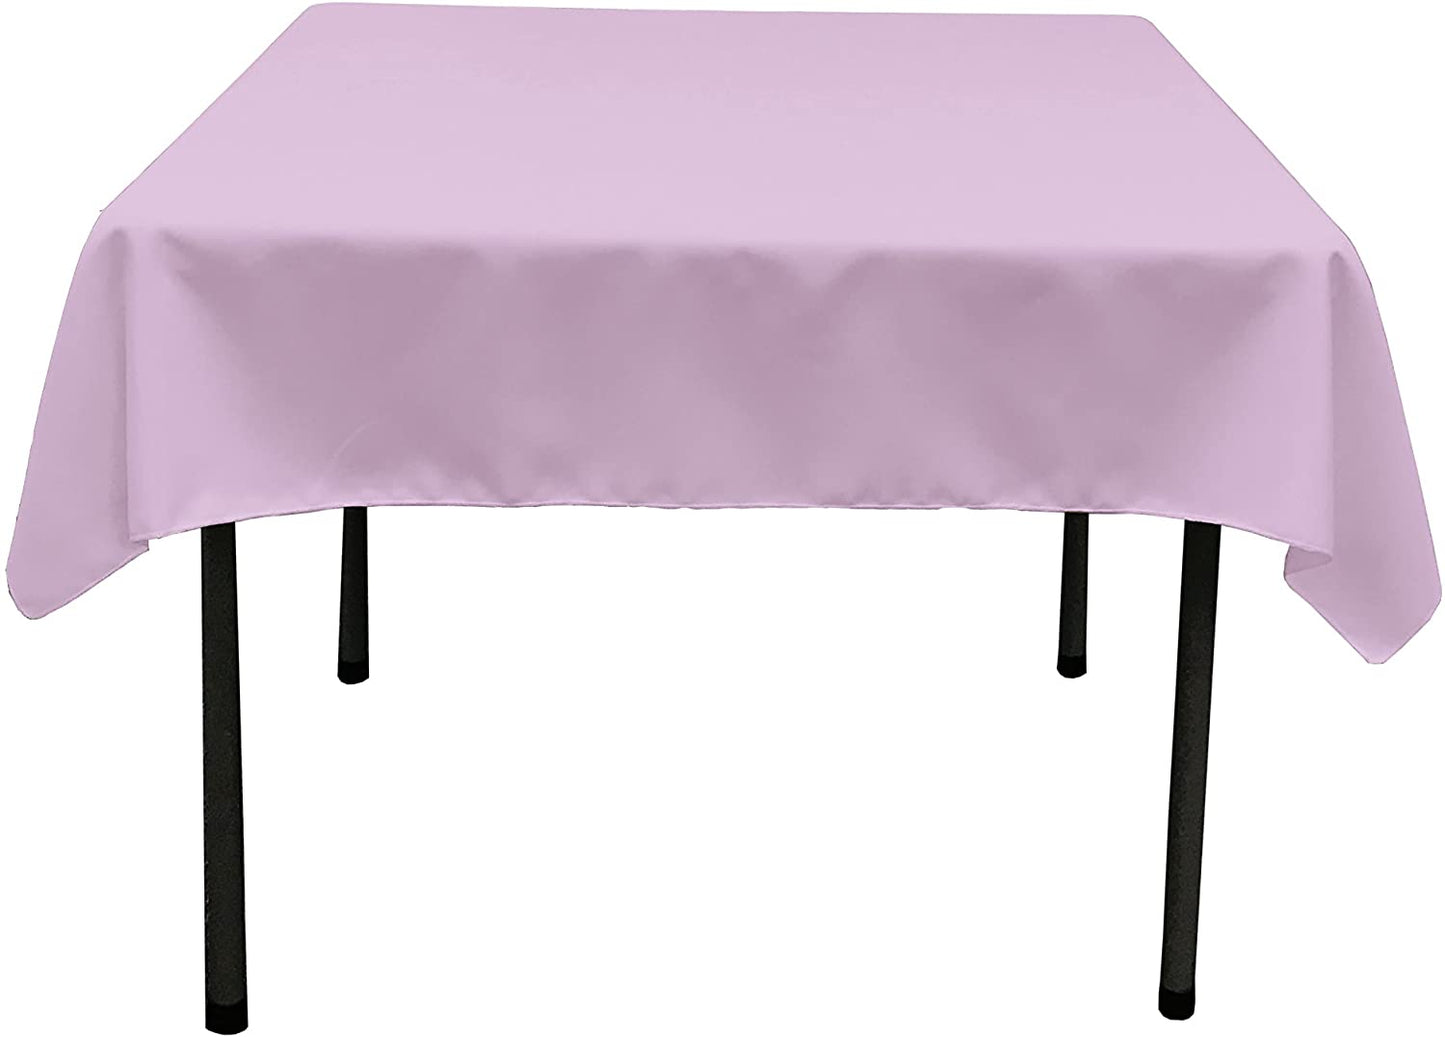 Polyester Poplin Washable Square Tablecloth, Stain and Wrinkle Resistant Table Cover Lilac